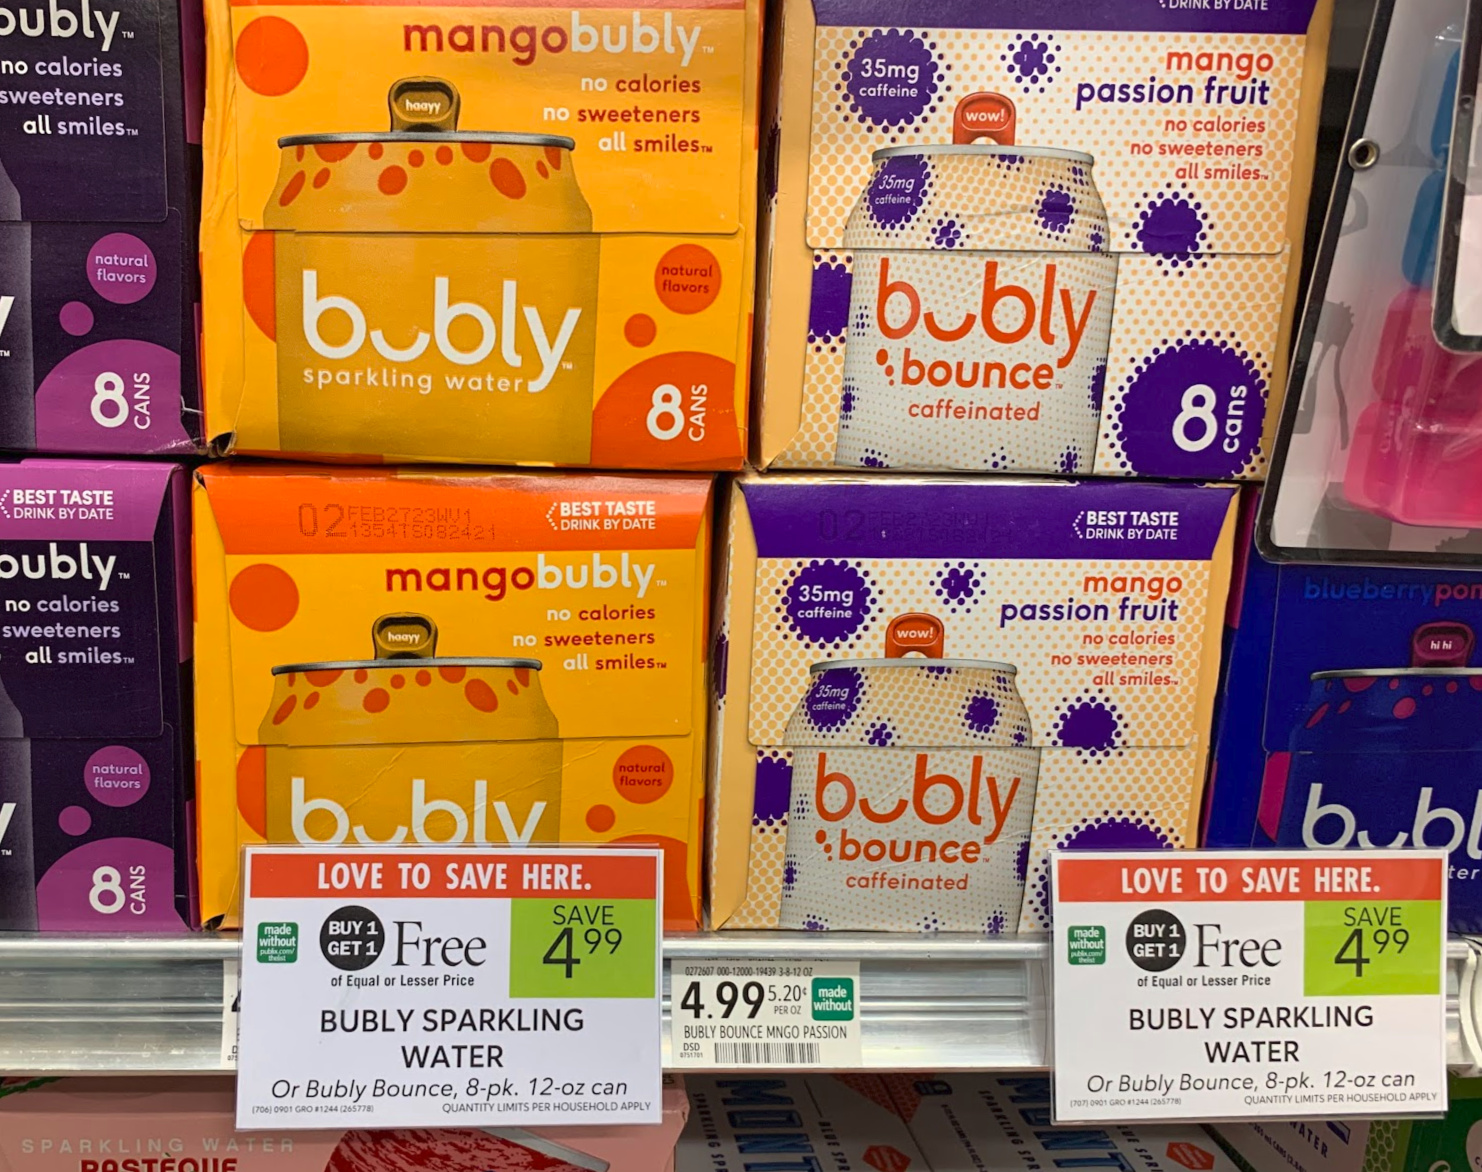 Packs Of Bubly Sparkling Water As Low As 2.17 At Publix iHeartPublix